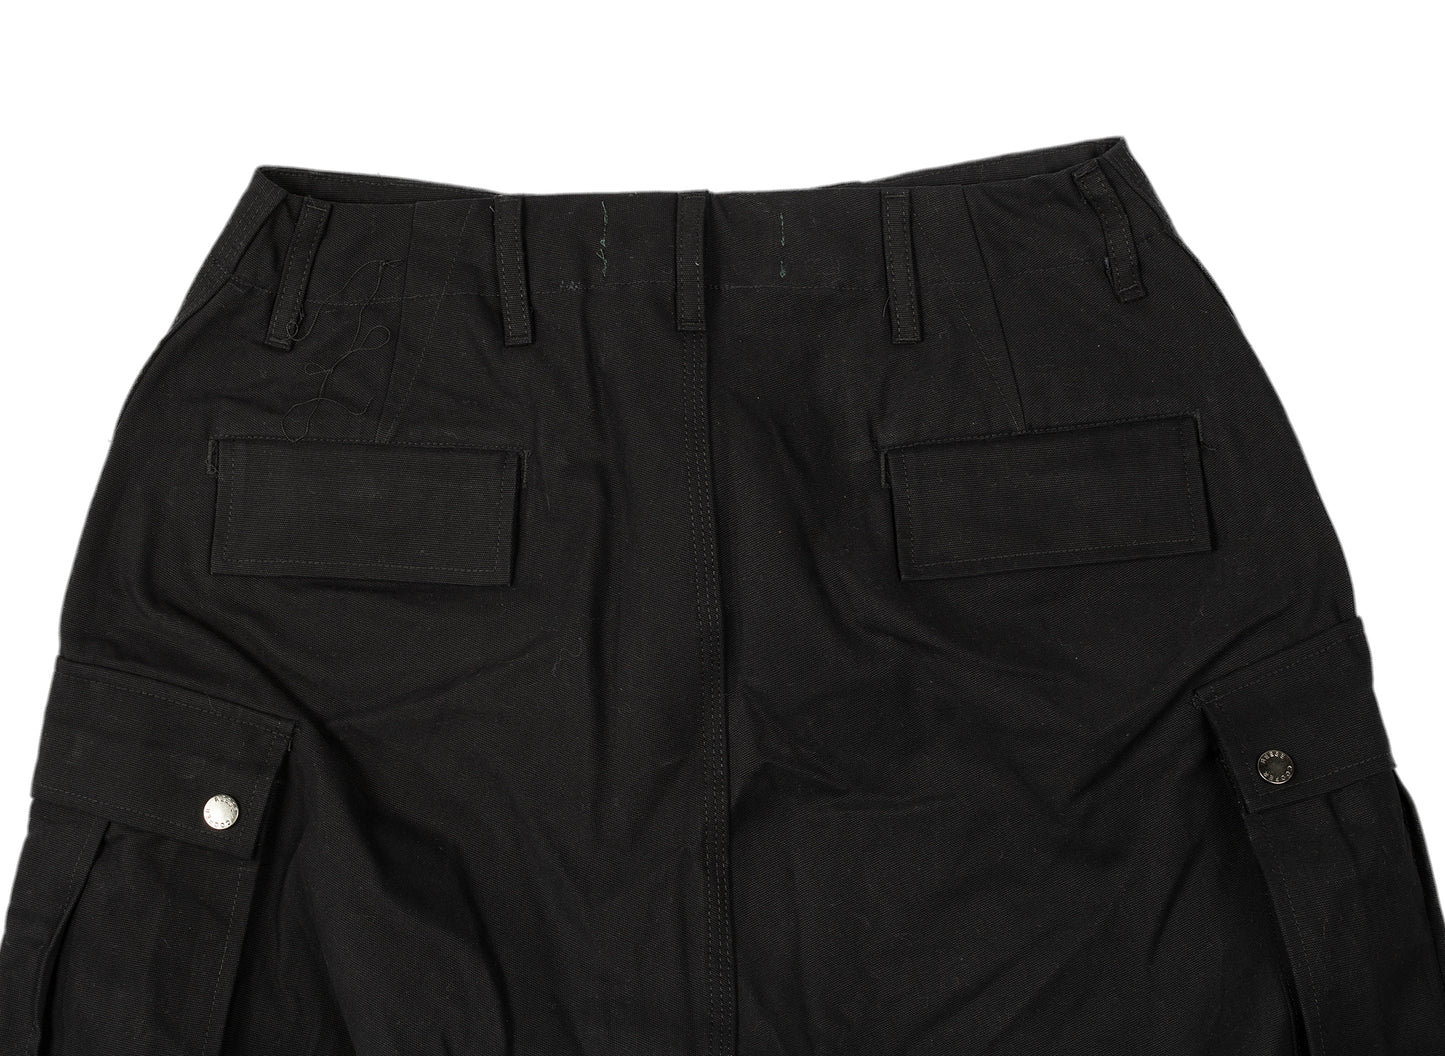 Reese Cooper Brushed Cotton Cargo Pants